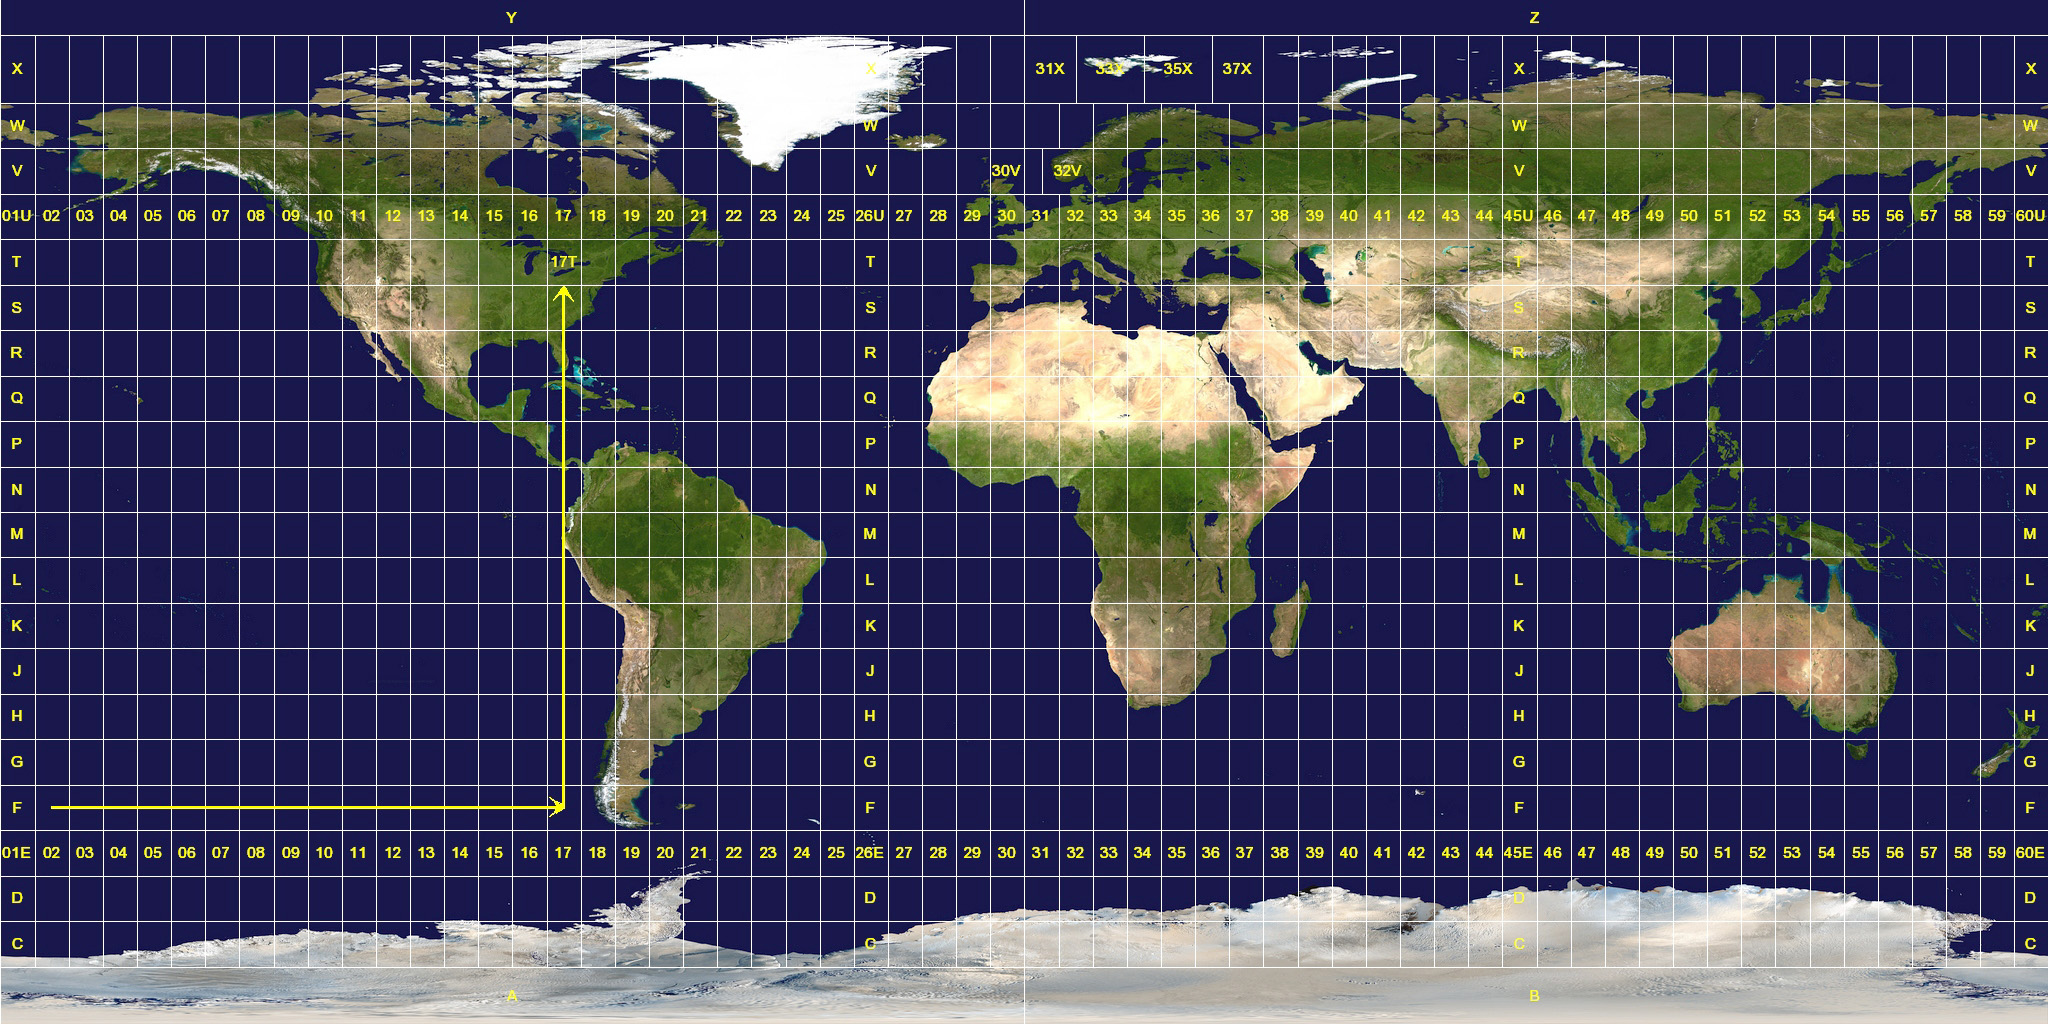 This map comes via the Wikipedia definition of Universal Transverse